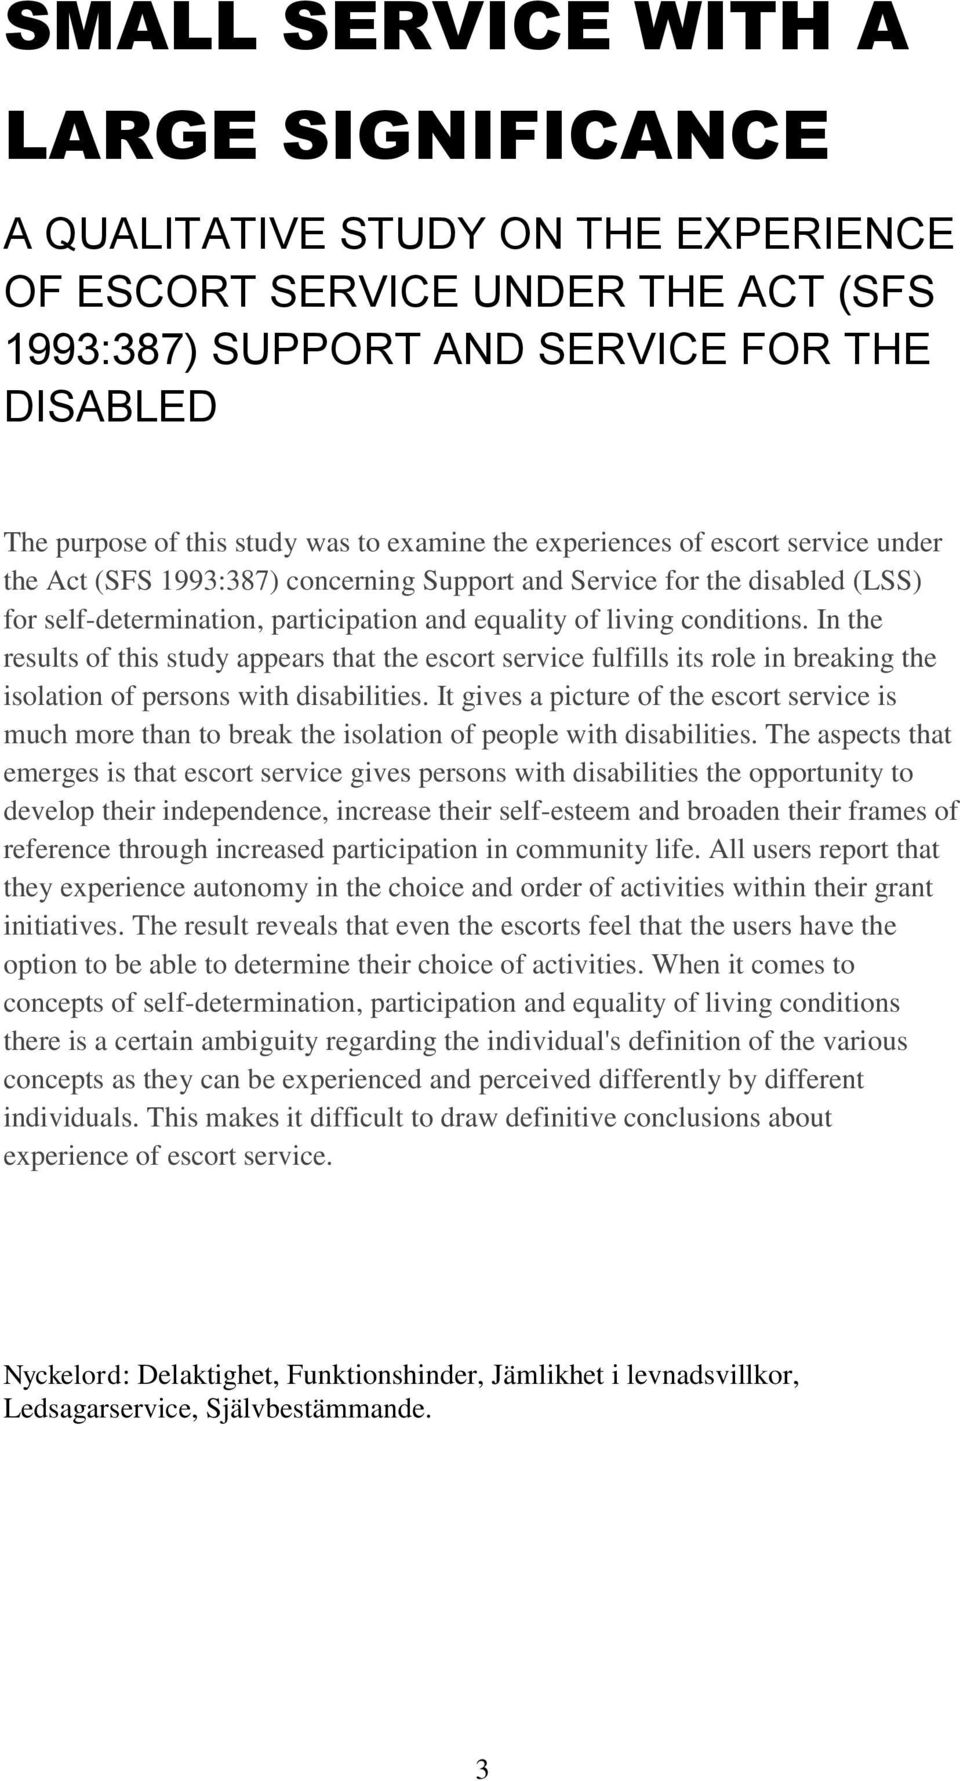 In the results of this study appears that the escort service fulfills its role in breaking the isolation of persons with disabilities.